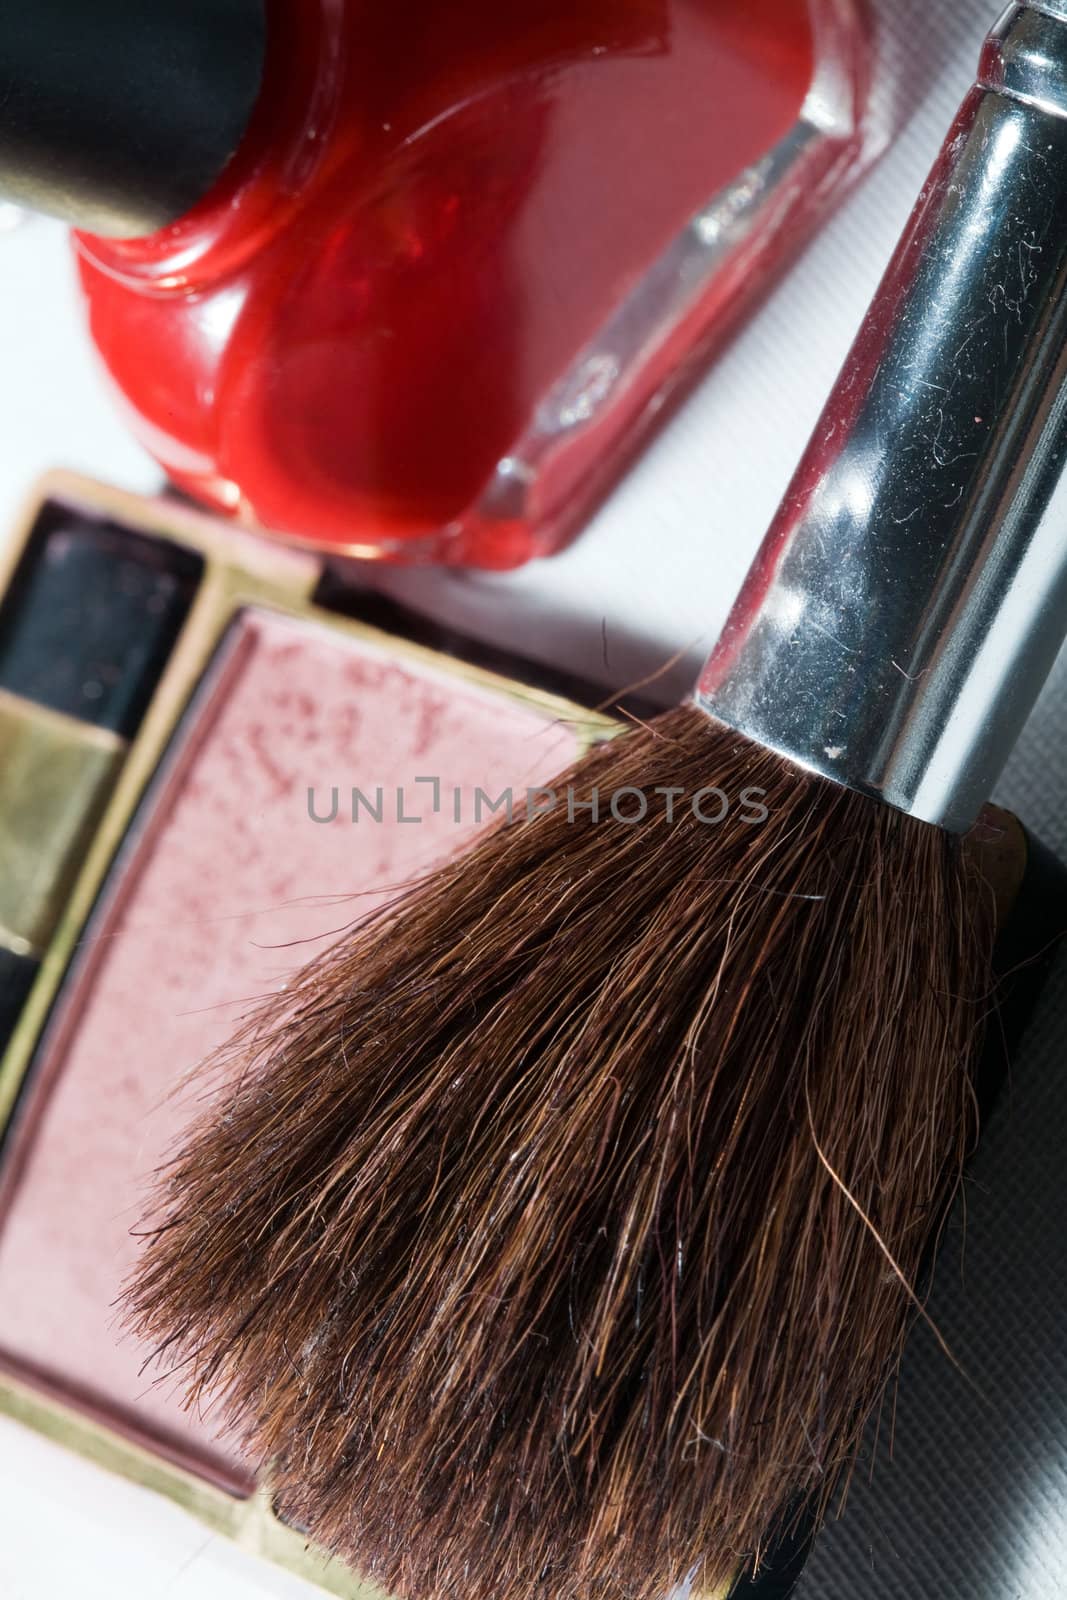 Cosmetic theme: an image of a brush and blush